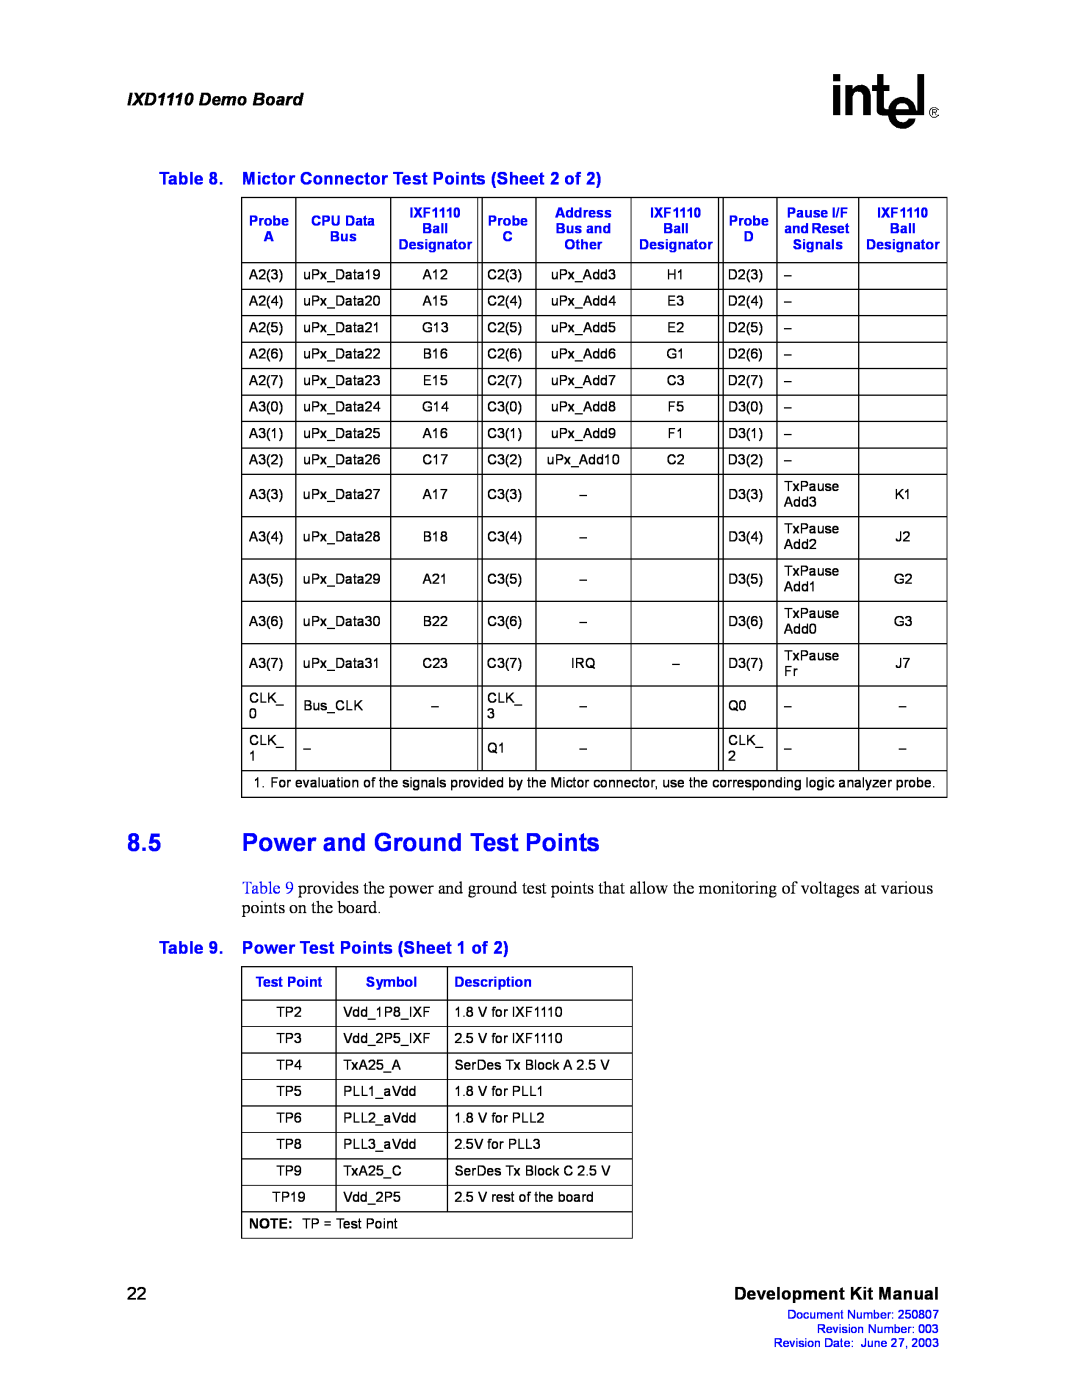 Intel IXD1110 manual Power and Ground Test Points, Mictor Connector Test Points Sheet 2 of, Power Test Points Sheet 1 of 